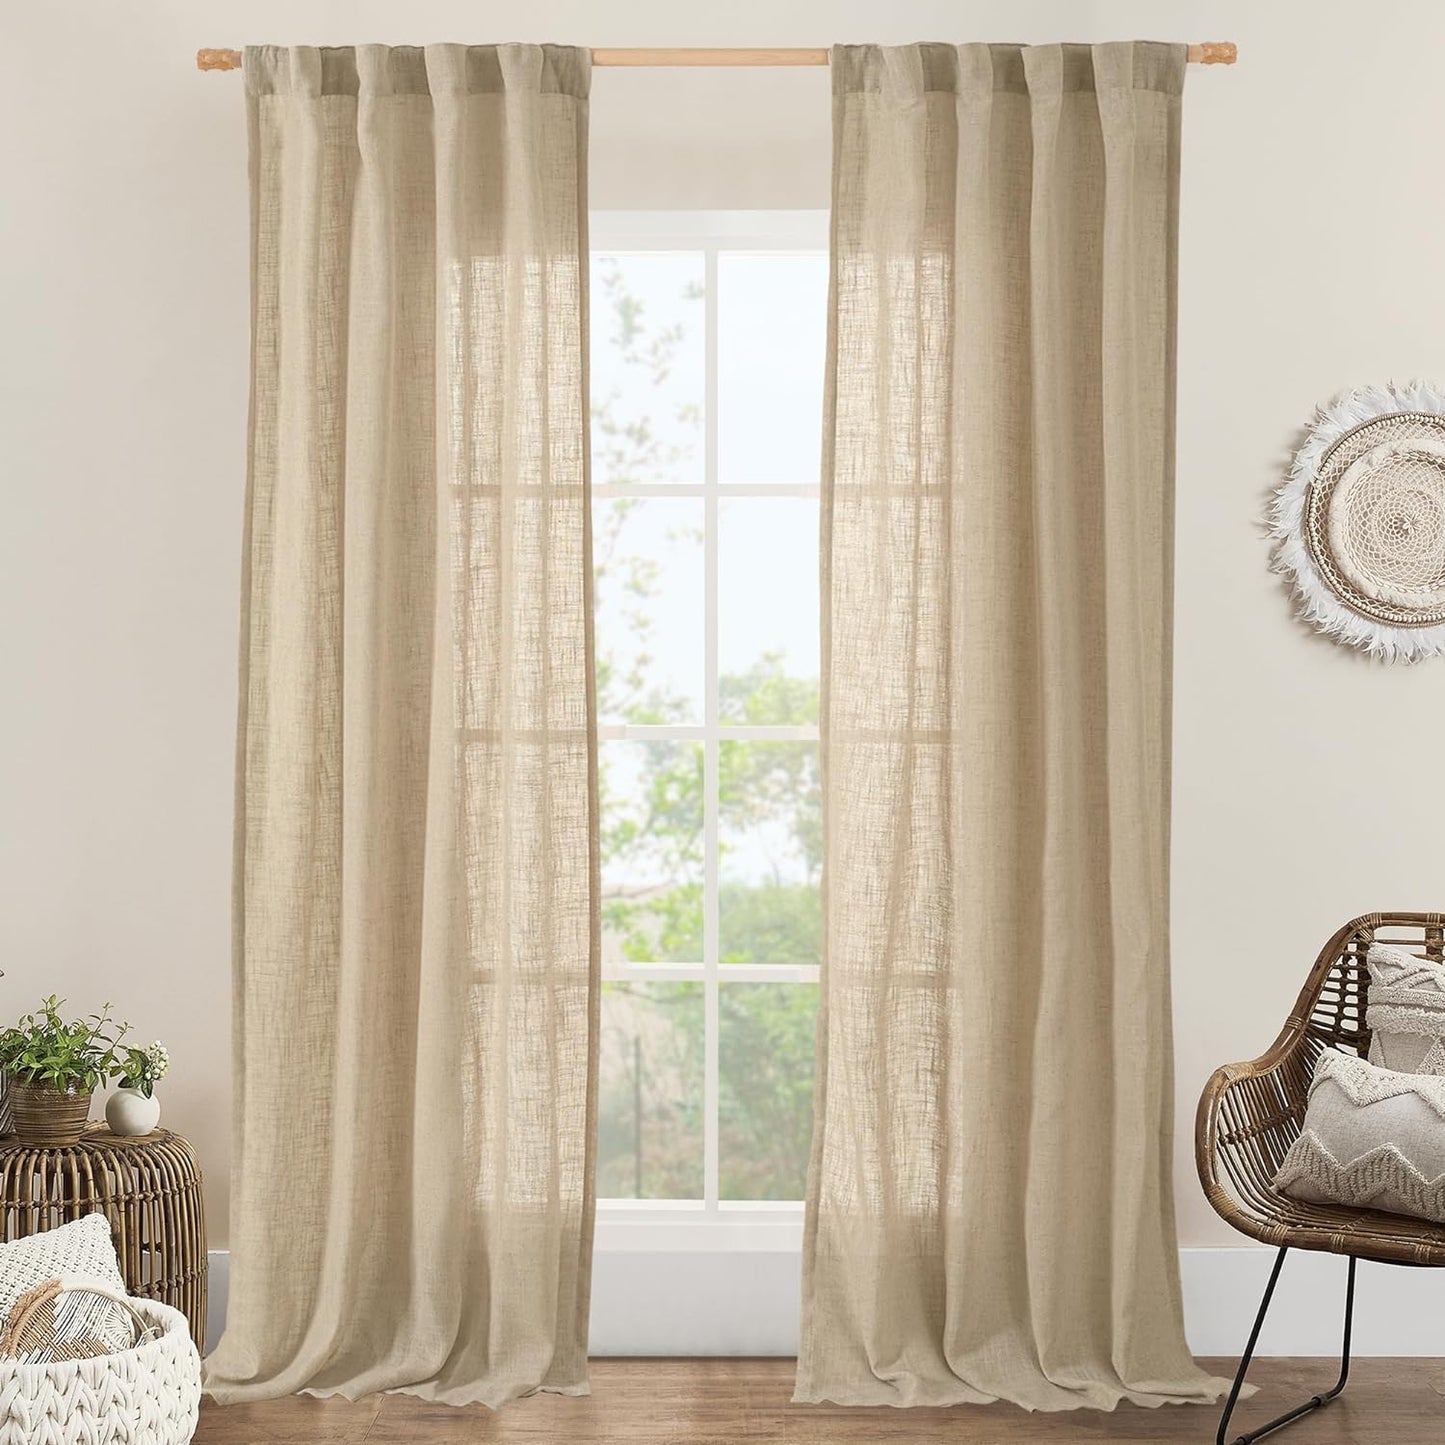 LAMIT Natural Linen Blended Curtains for Living Room, Back Tab and Rod Pocket Semi Sheer Curtains Light Filtering Country Rustic Drapes for Bedroom/Farmhouse, 2 Panels,52 X 108 Inch, Linen  LAMIT Brown 38W X 84L 